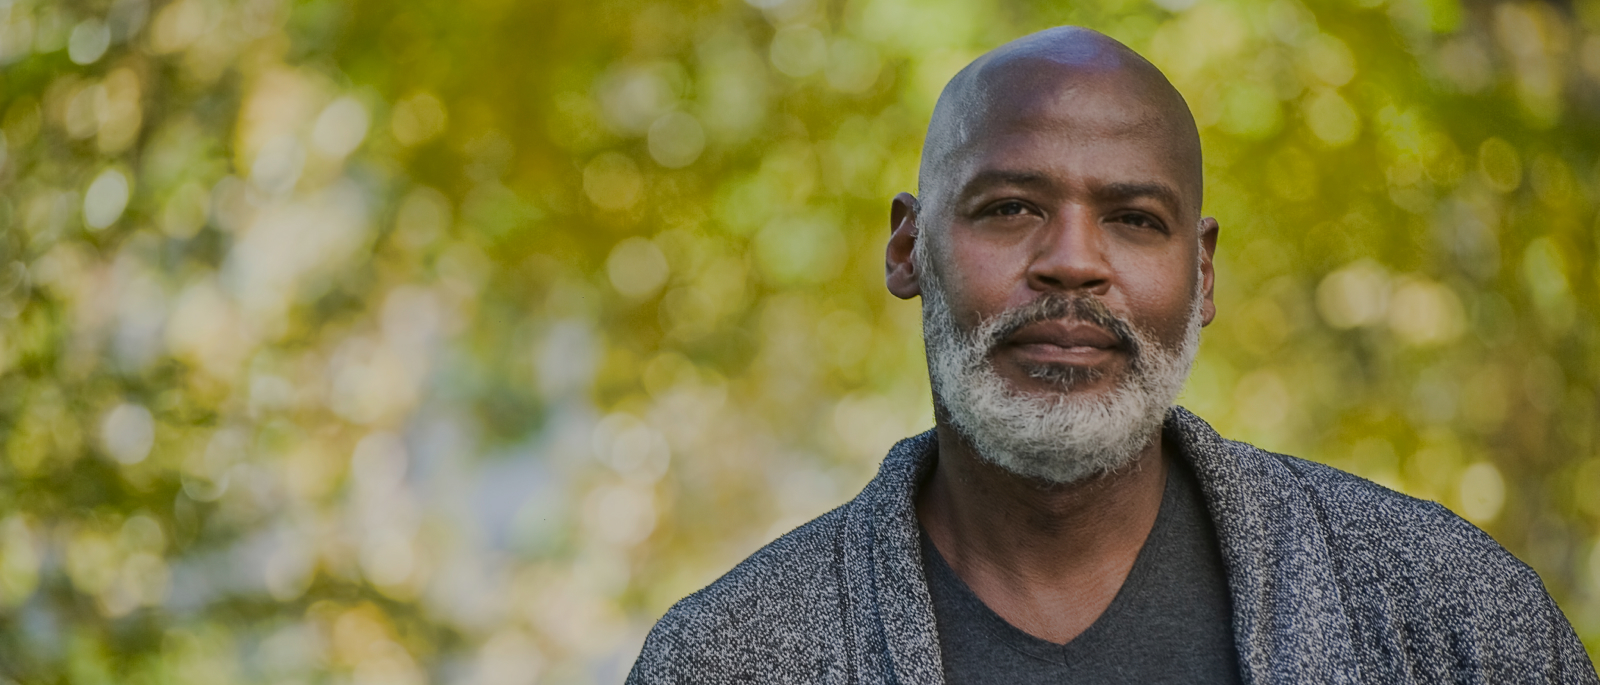 A black man with a gray beard thoughtfully looks toward the camera.  Behind him are green trees.